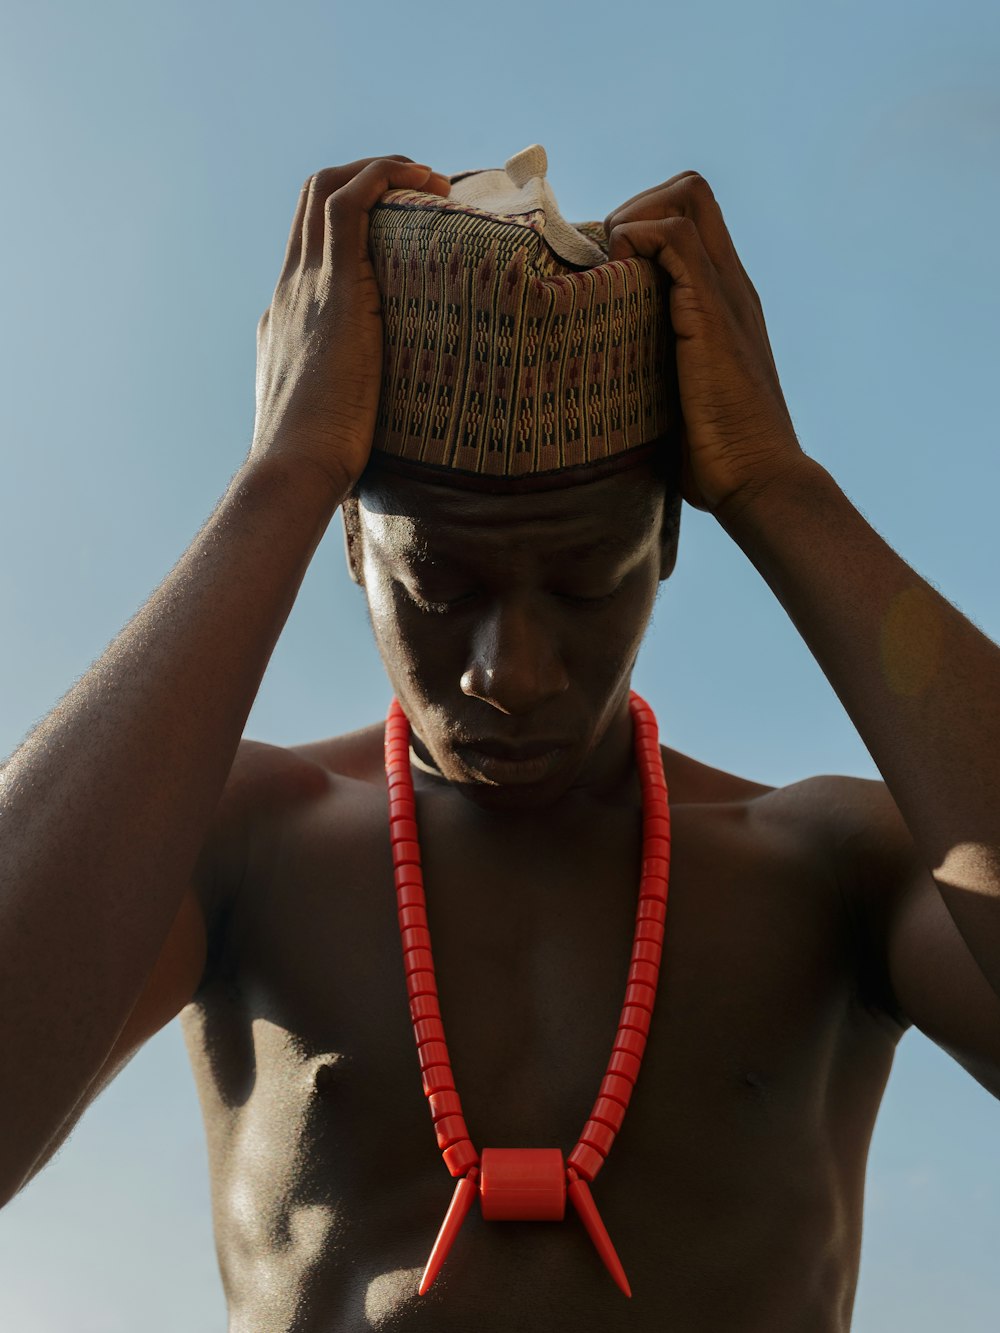 a man wearing a red beaded necklace and a hat